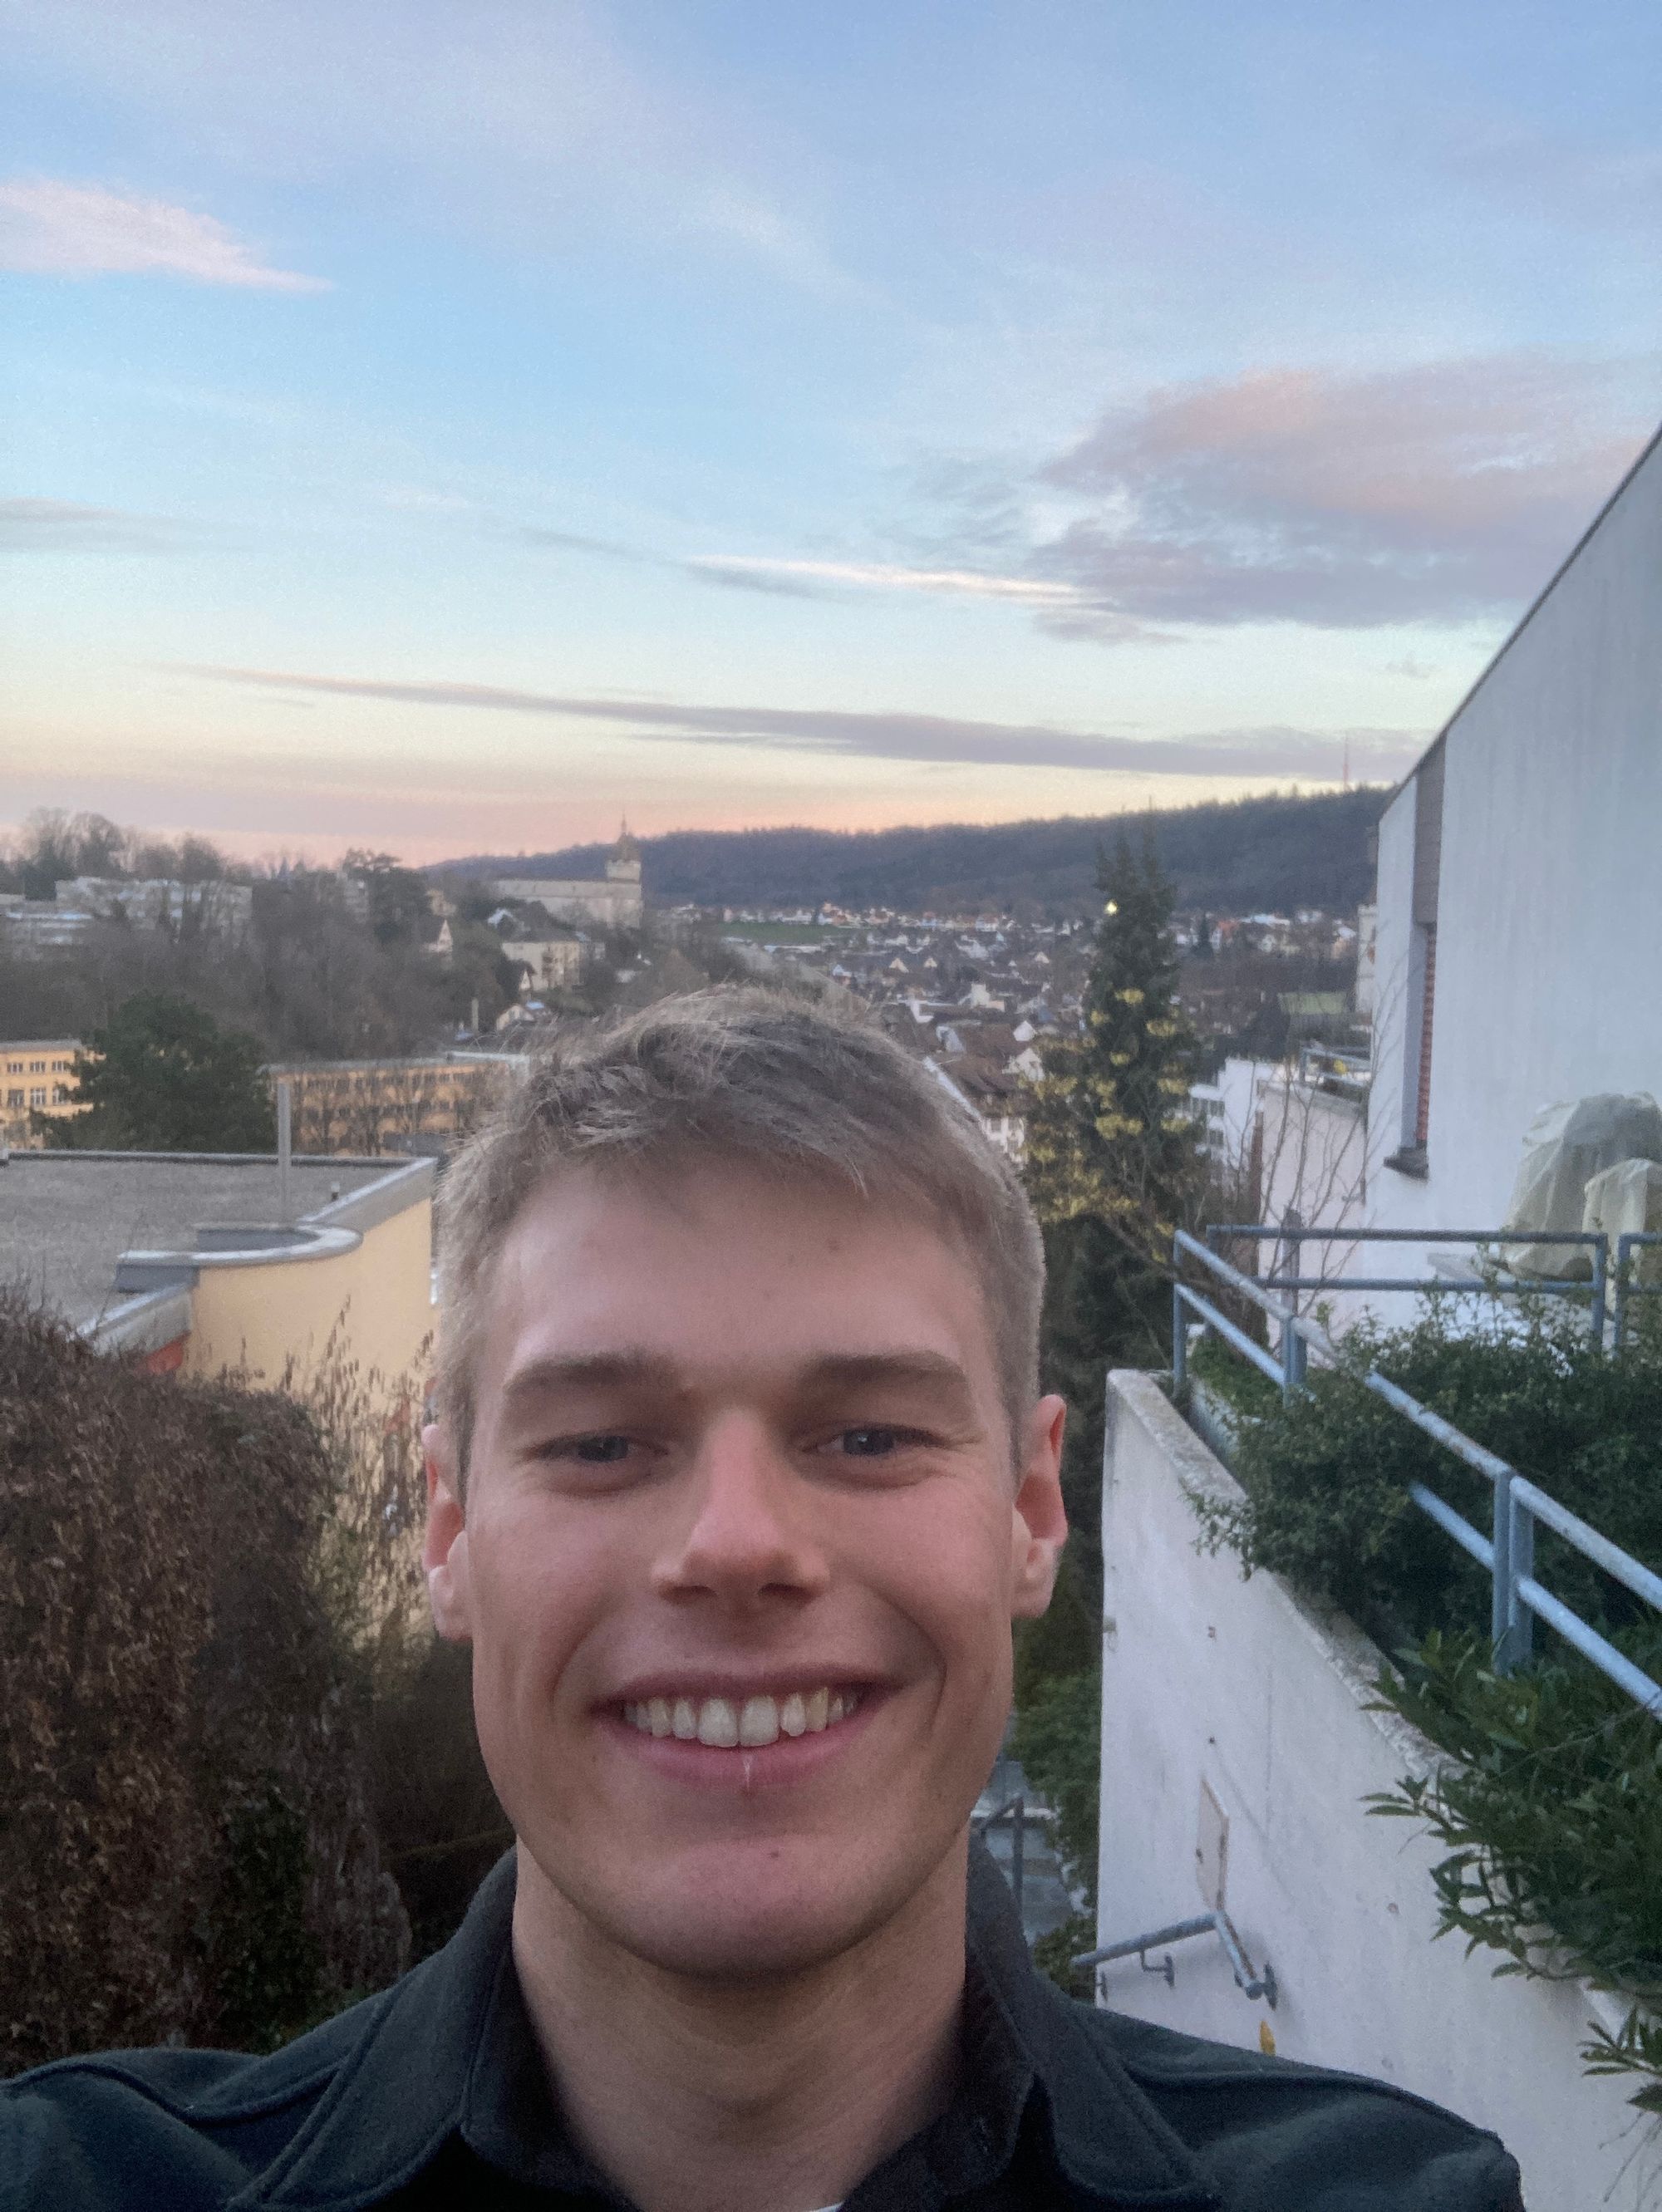 Selfie of me (Oskar Eggert) with Schaffhausen in the background. You can tell sunset is not too far away by the sky.